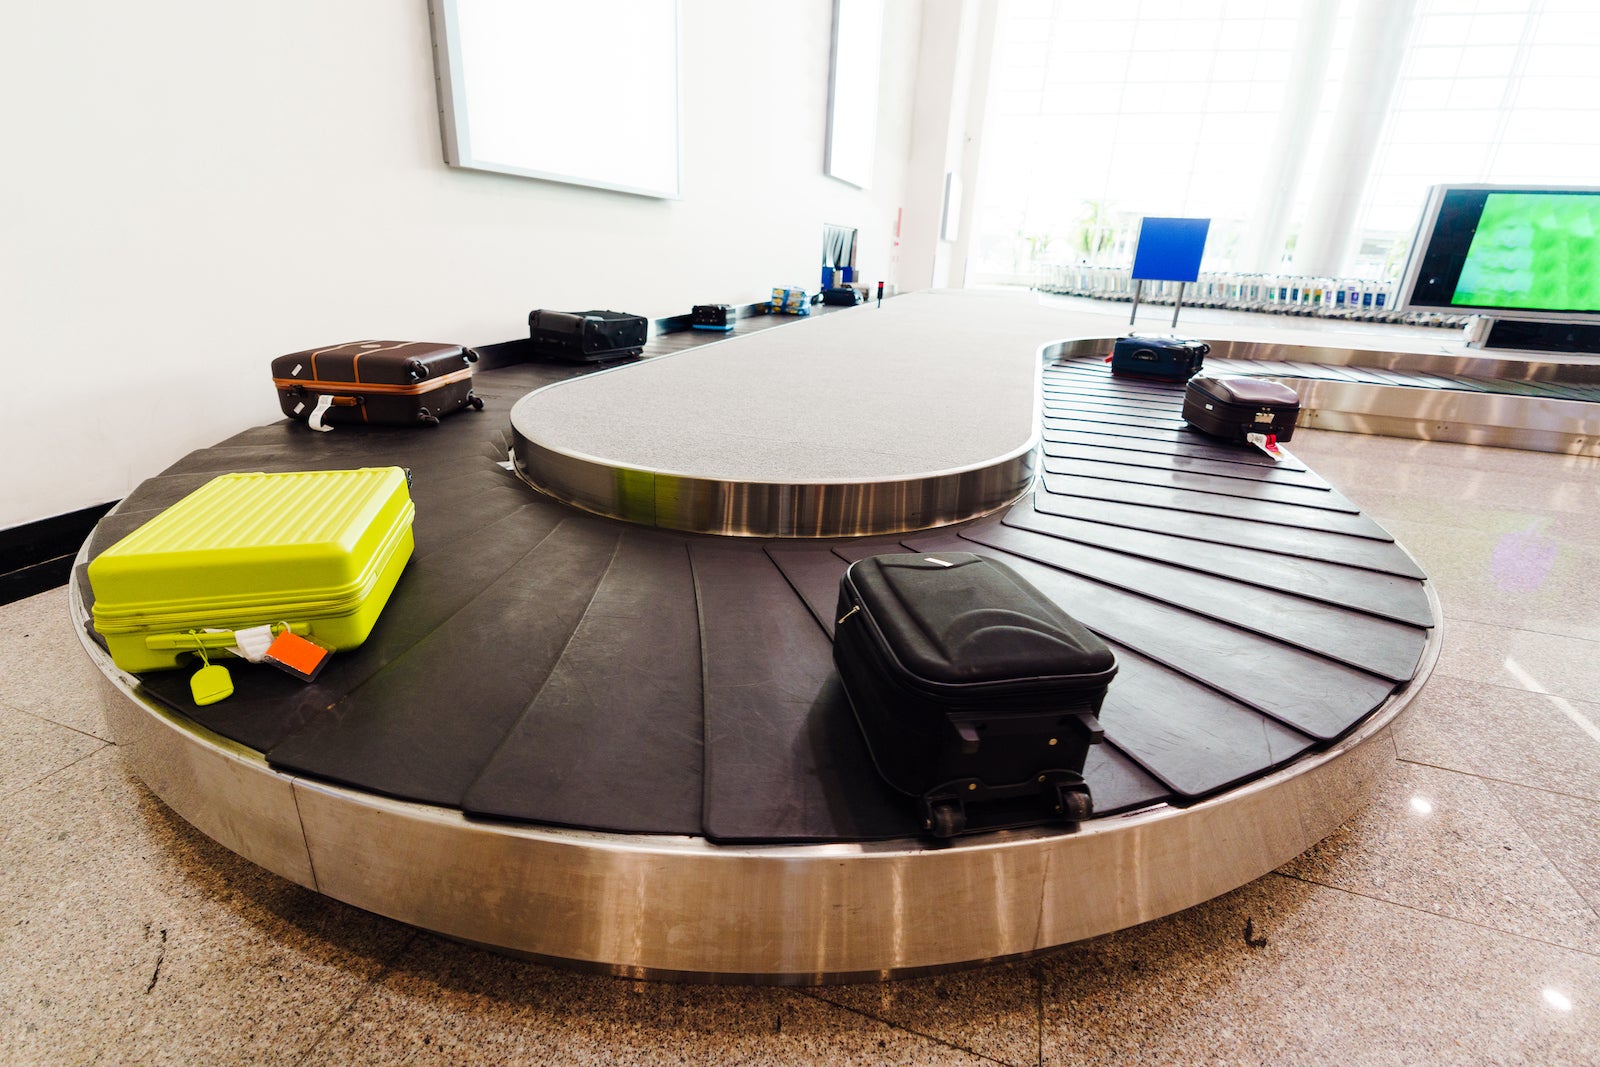 Suitcase or luggage with conveyor belt in the international airport.